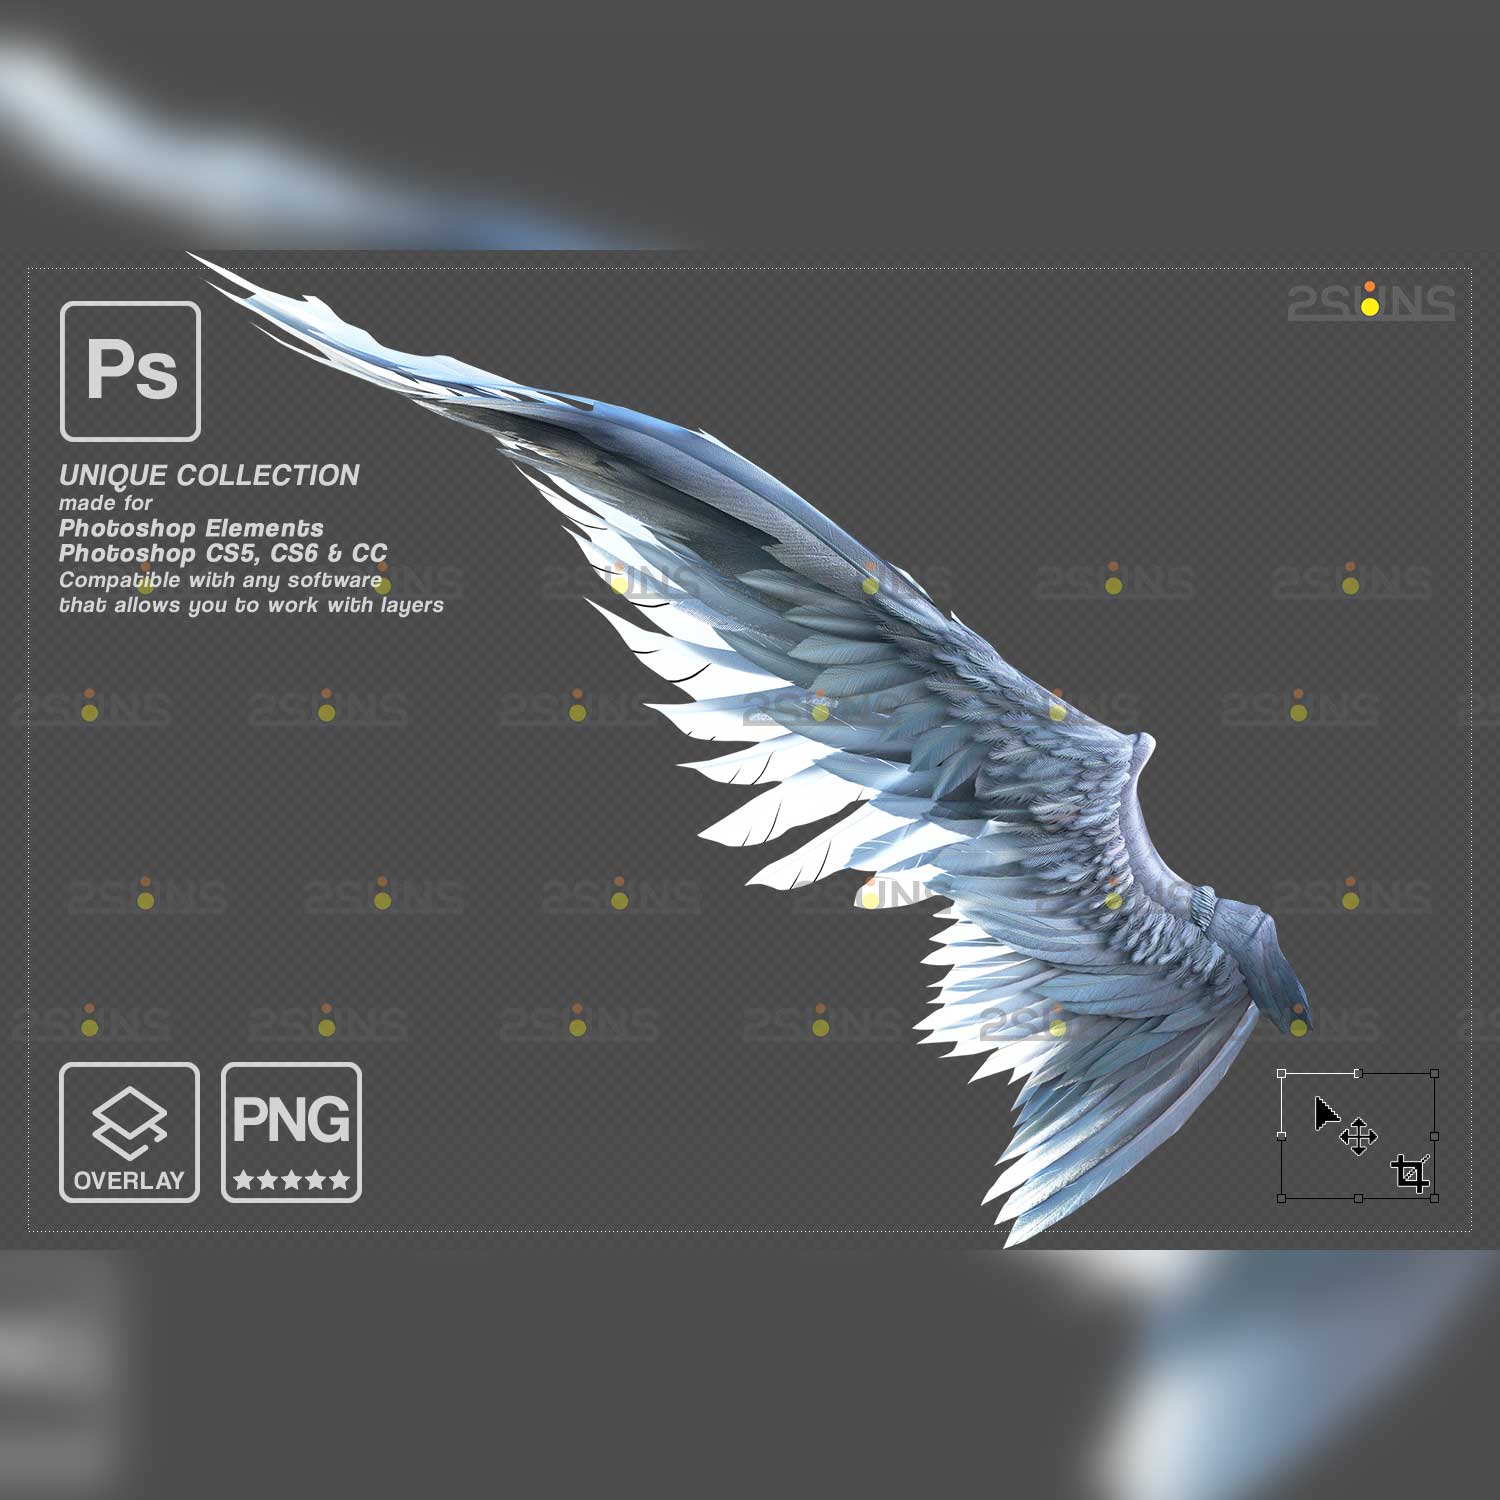 Realistic White Black Gold Angel Wings Photoshop Overlays Slim wing.